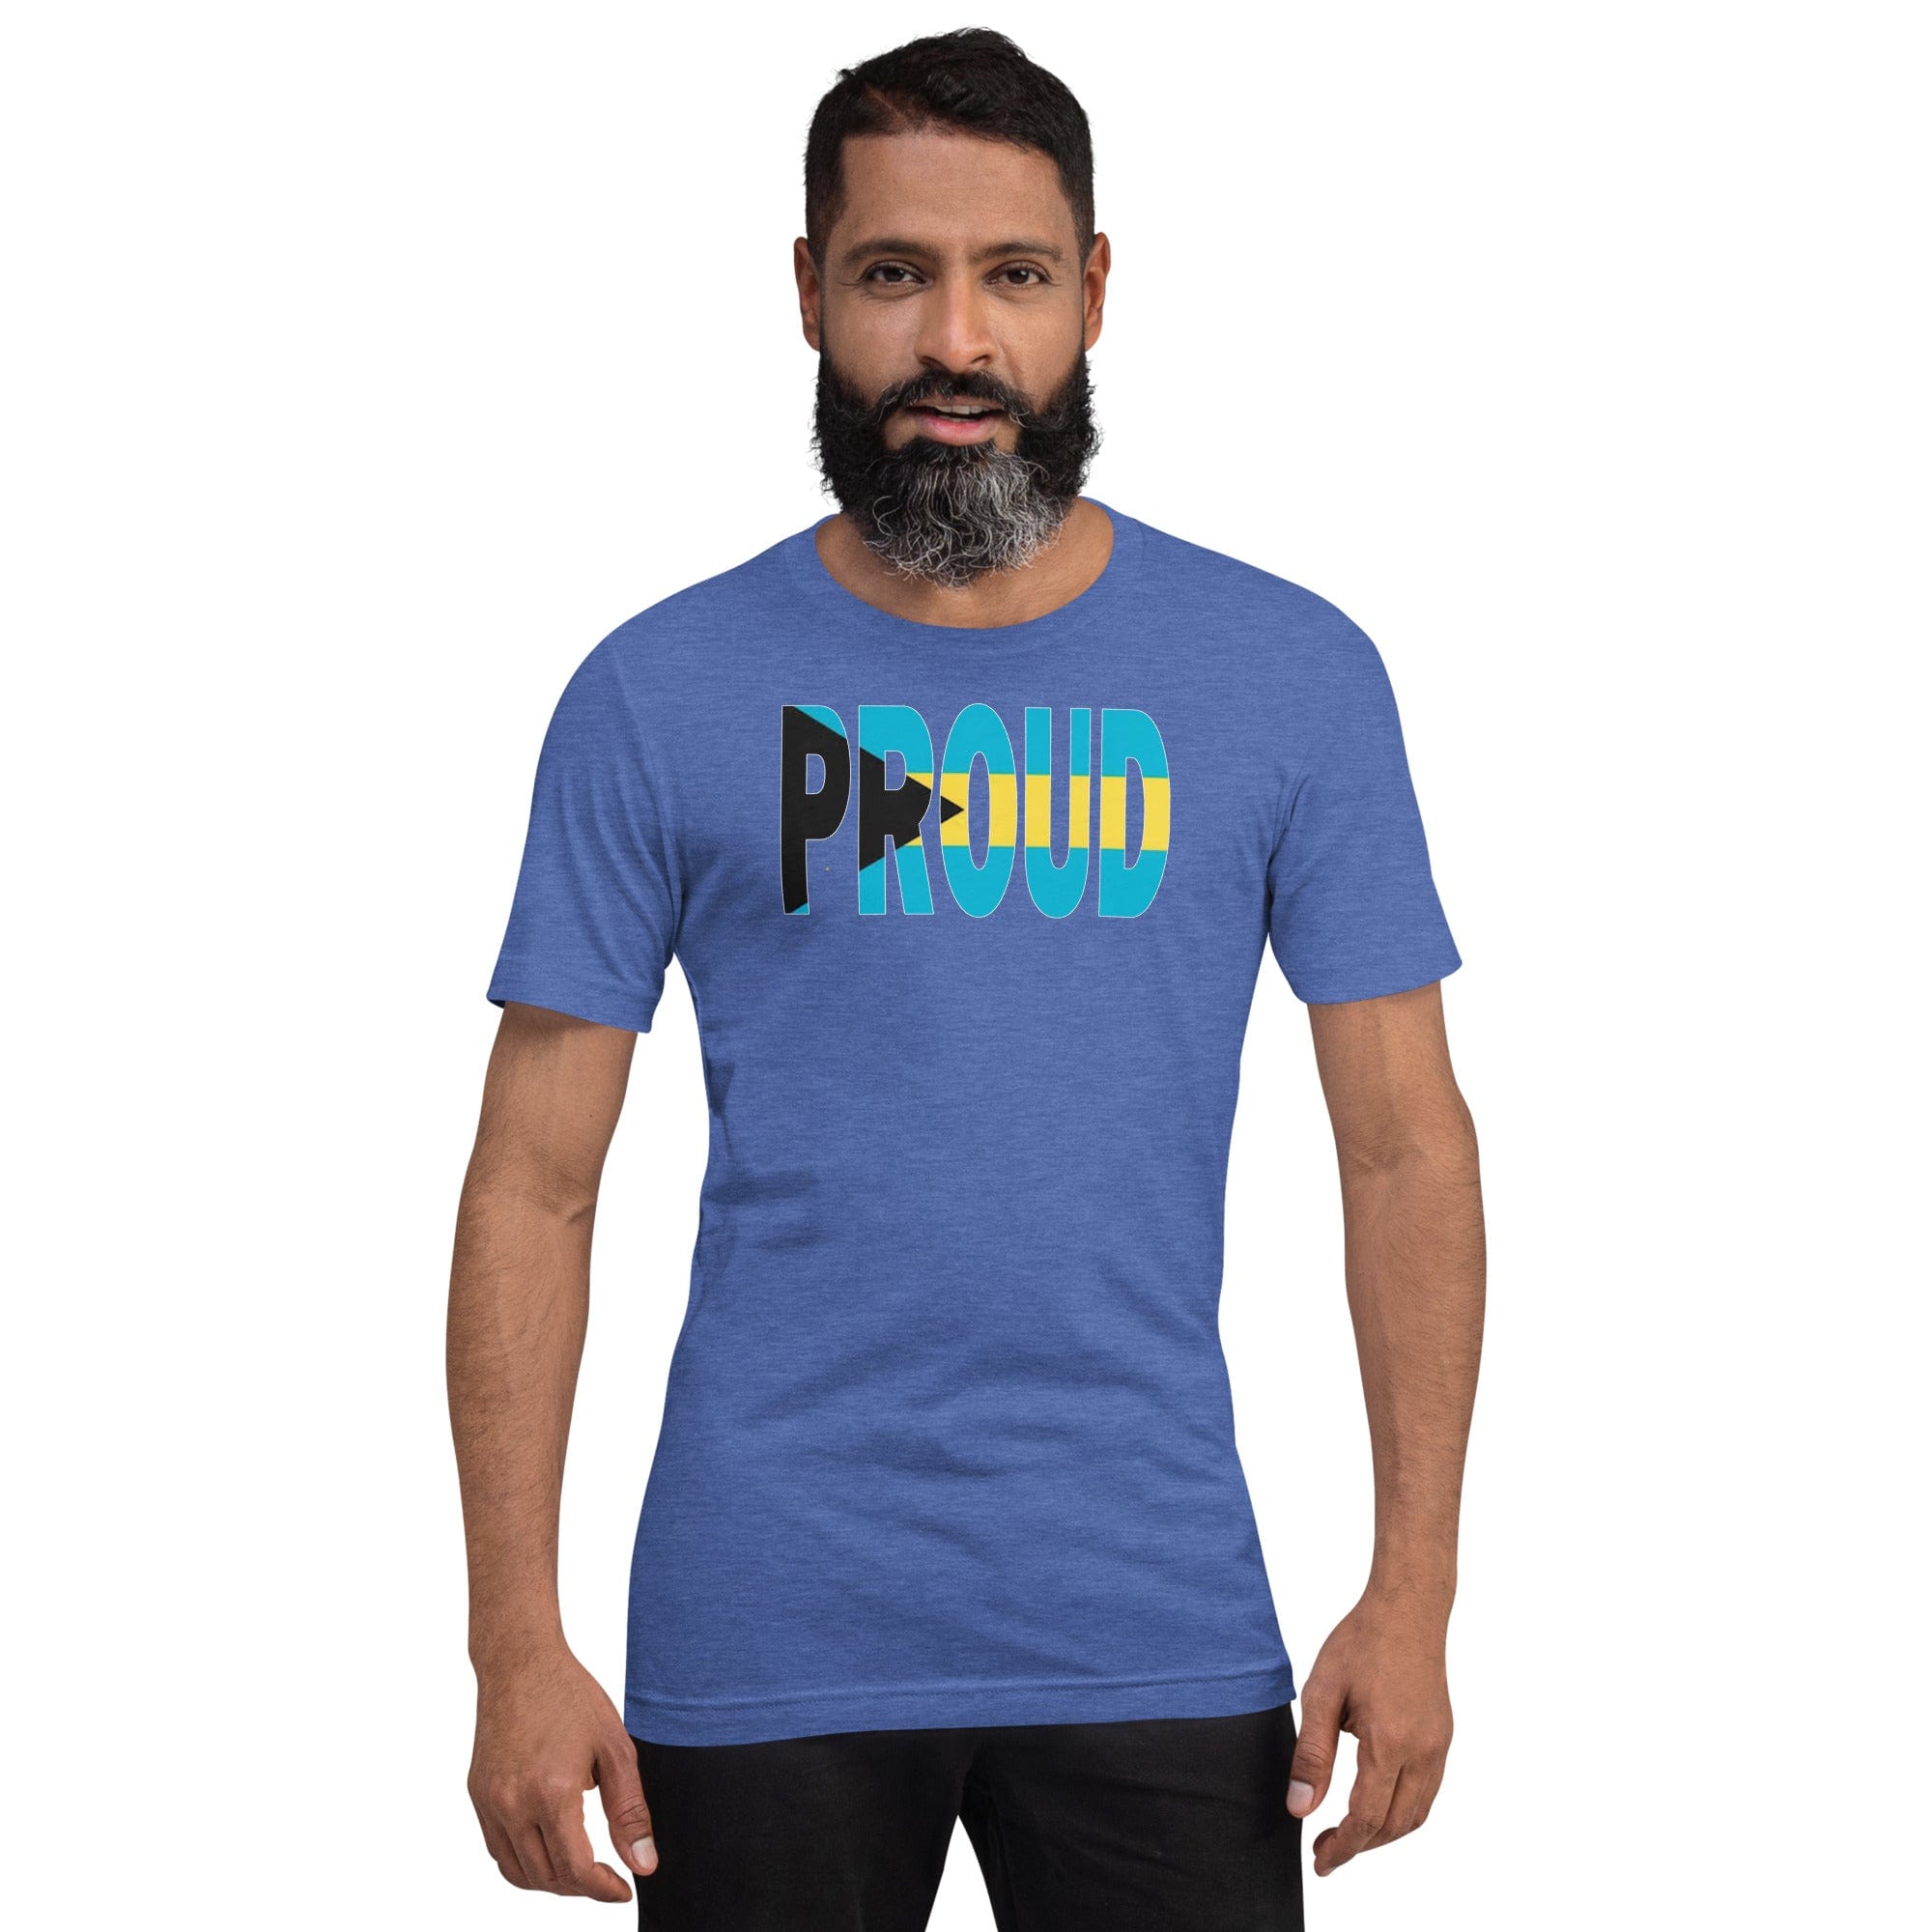 Bahamas Flag designed to spell Proud on a blue color t-shirt worn by a black man.